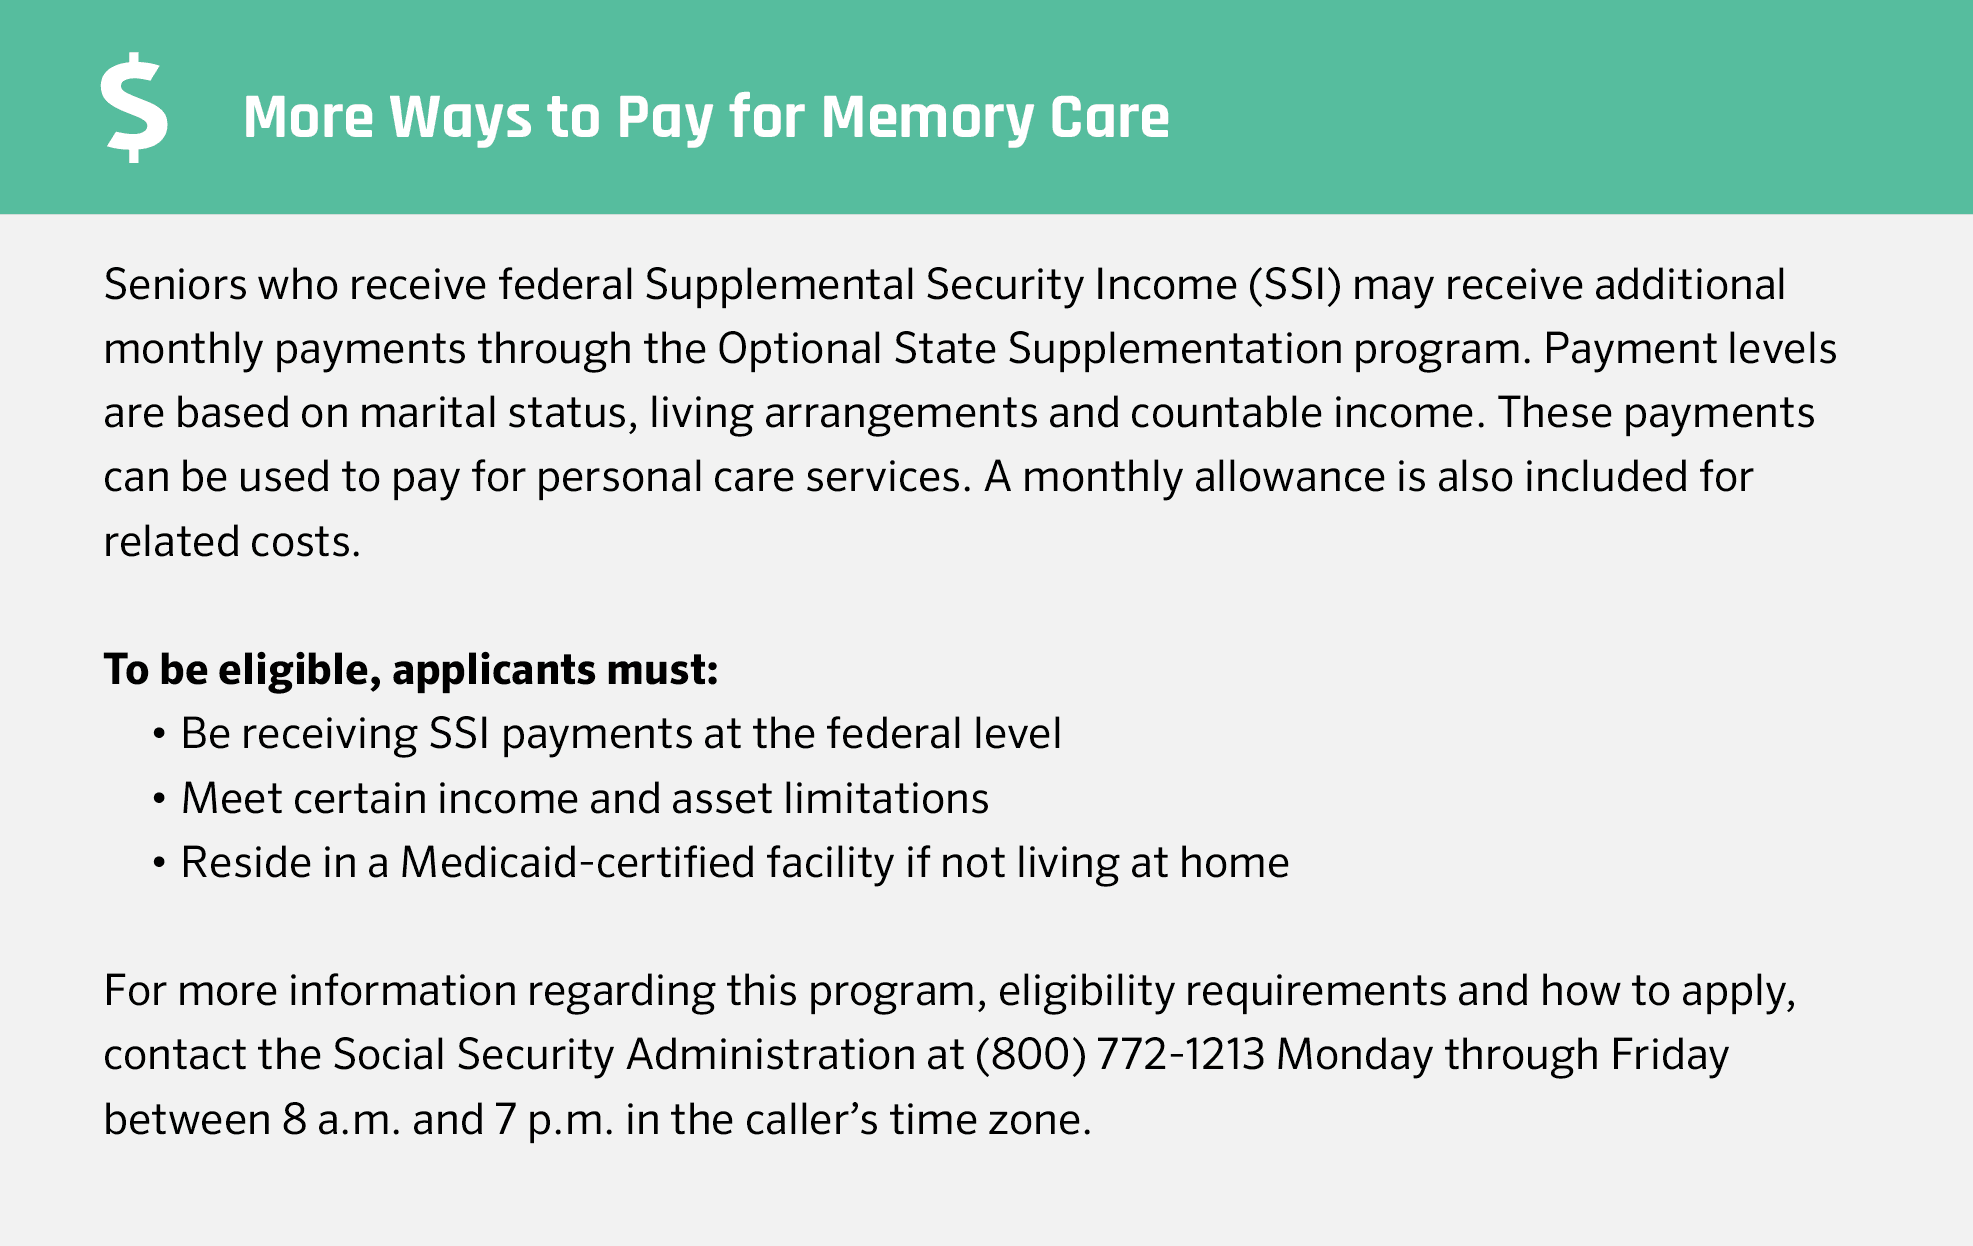 Financial Assistance for Memory Care in Michigan